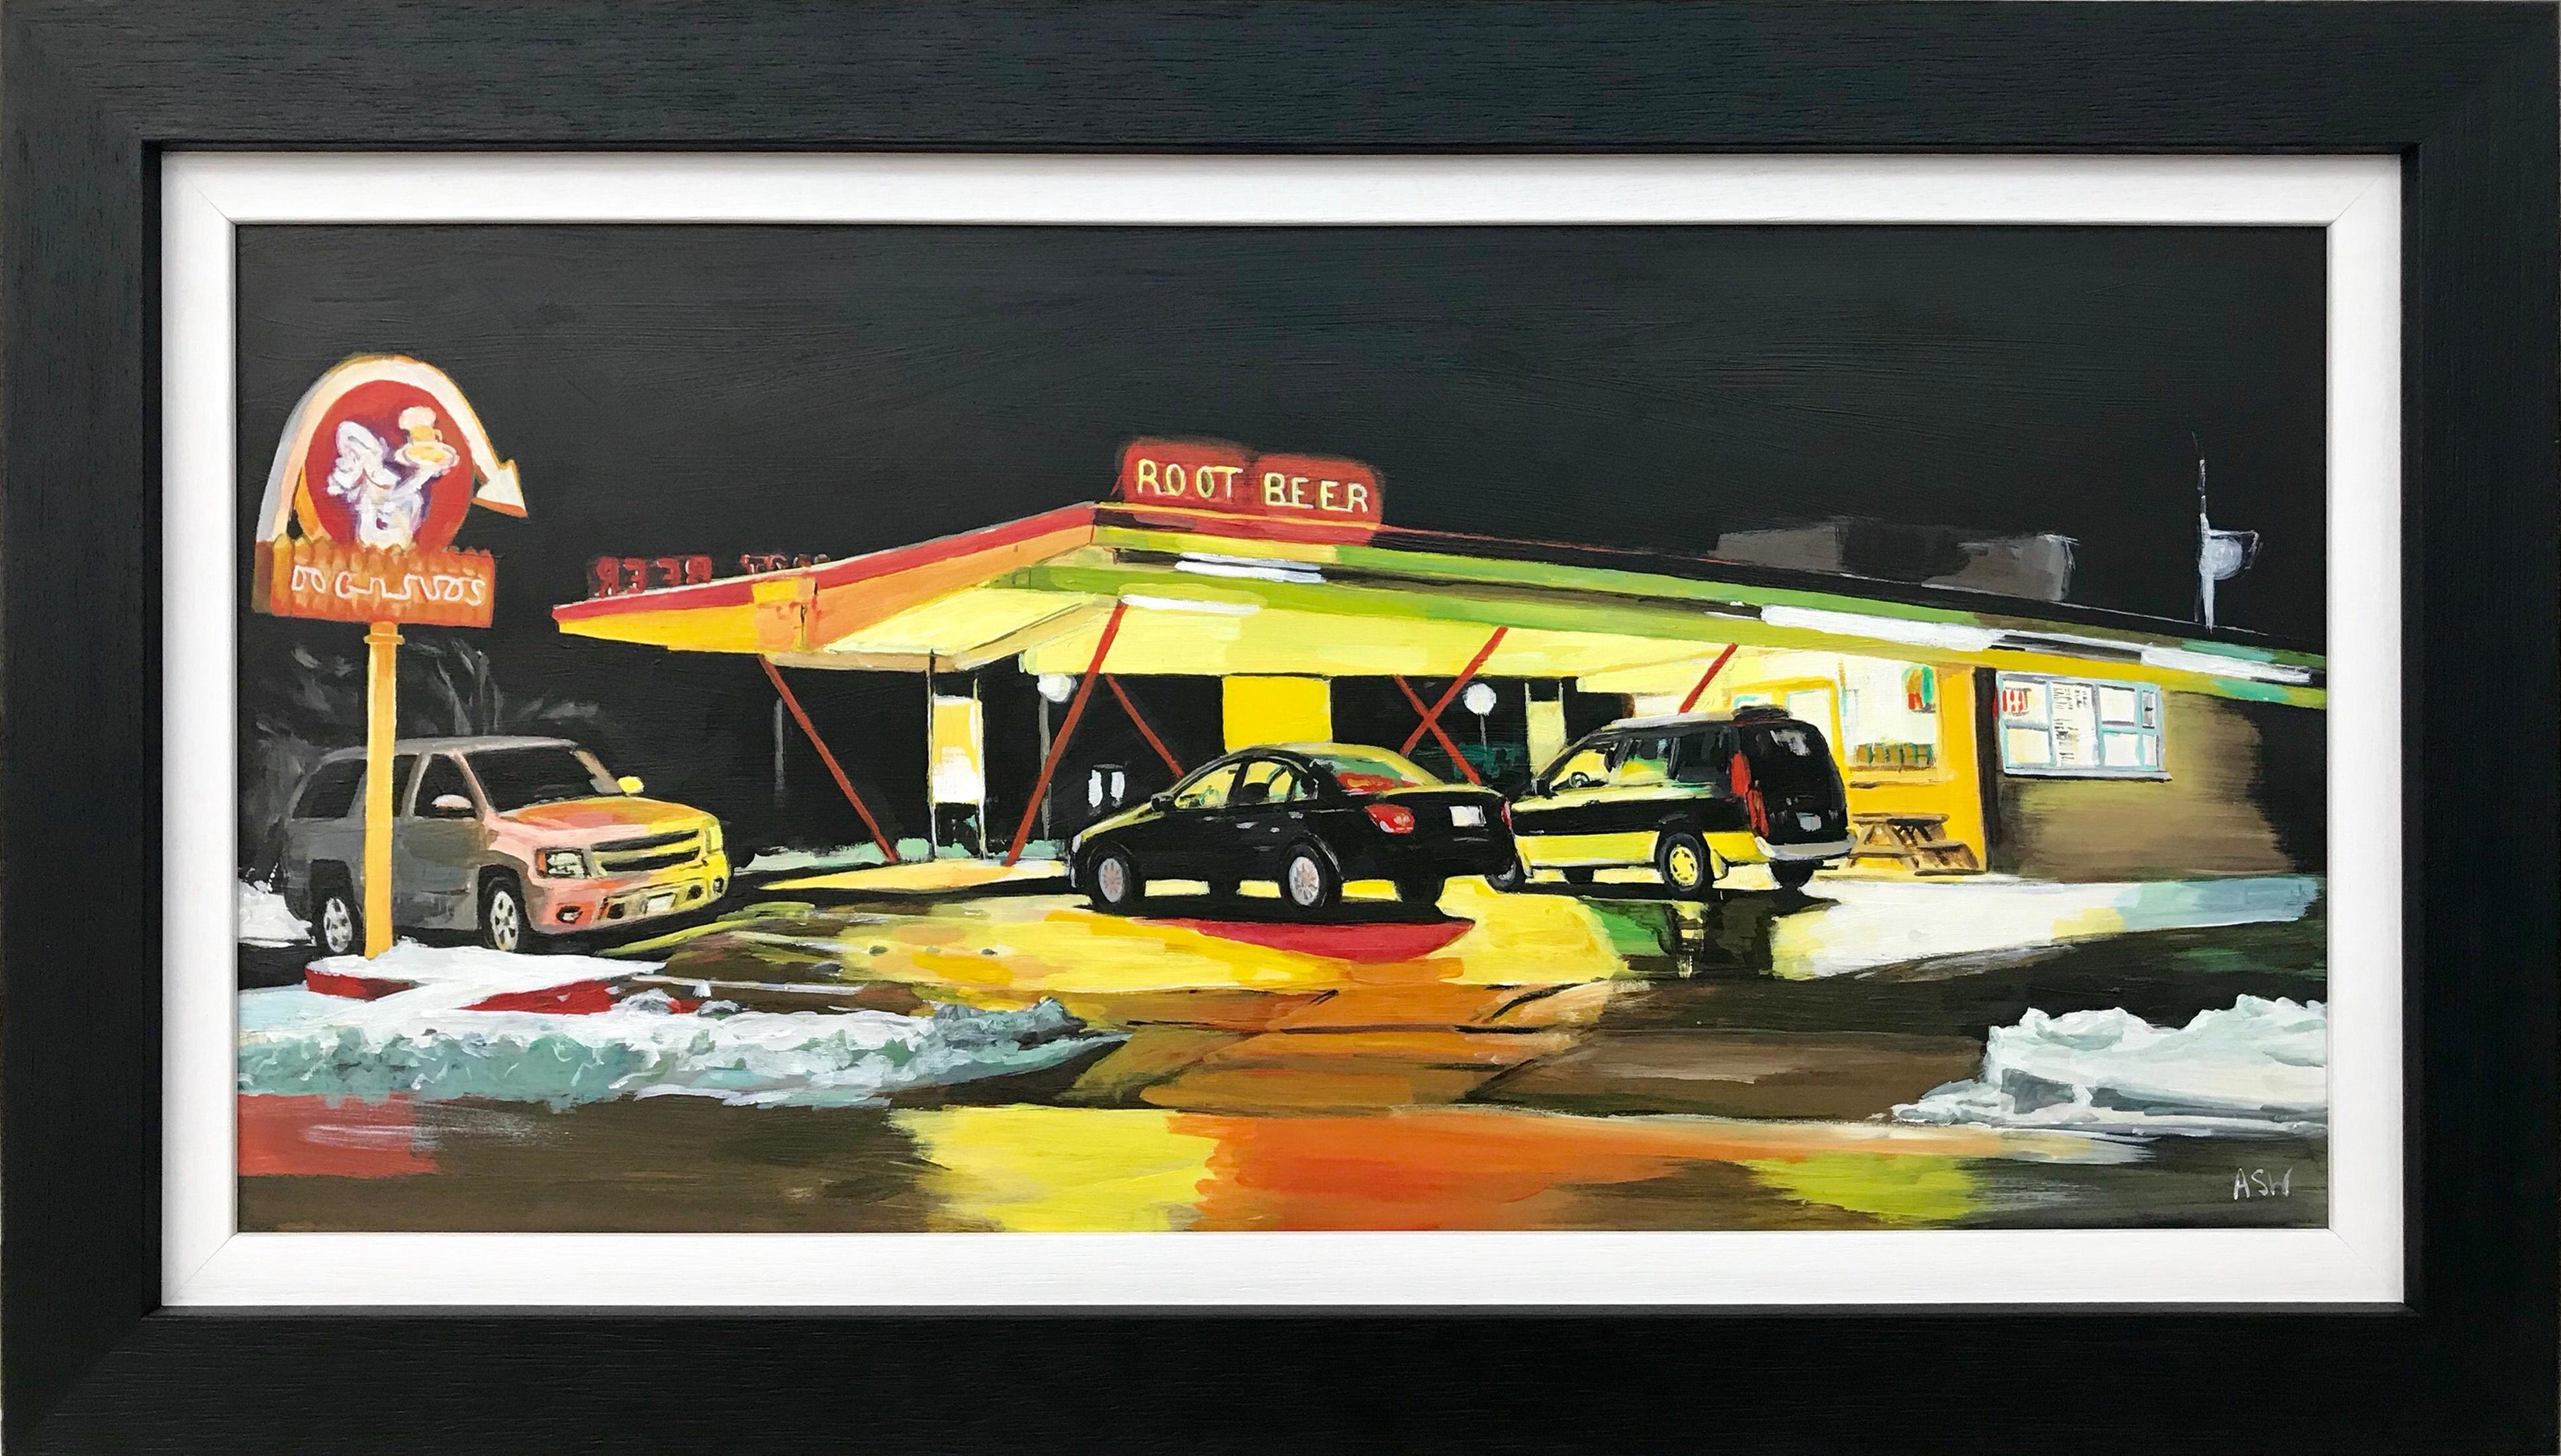 Angela Wakefield Landscape Painting - Route 66 Root Beer American Gas Station Painting by British Contemporary Artist